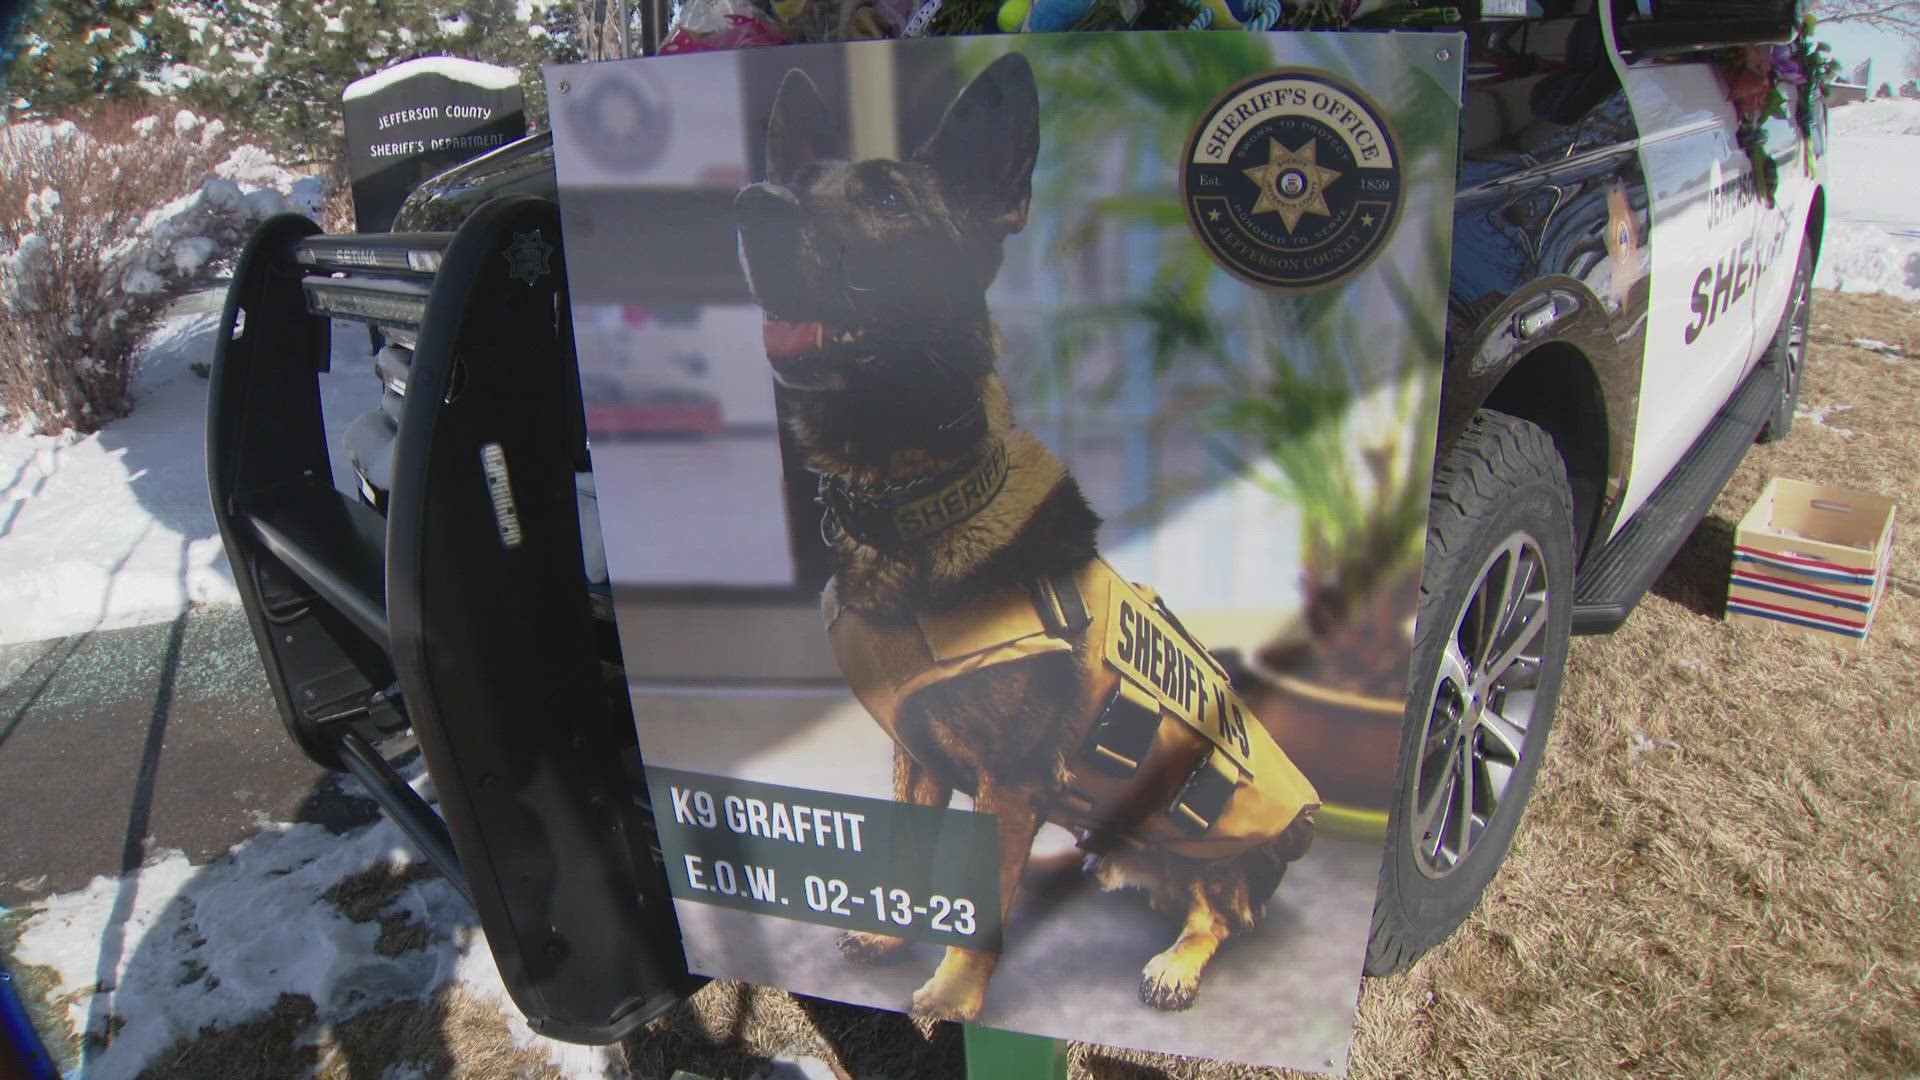 Jefferson County Sheriff's K-9 Graffit was killed in the line of duty this week.